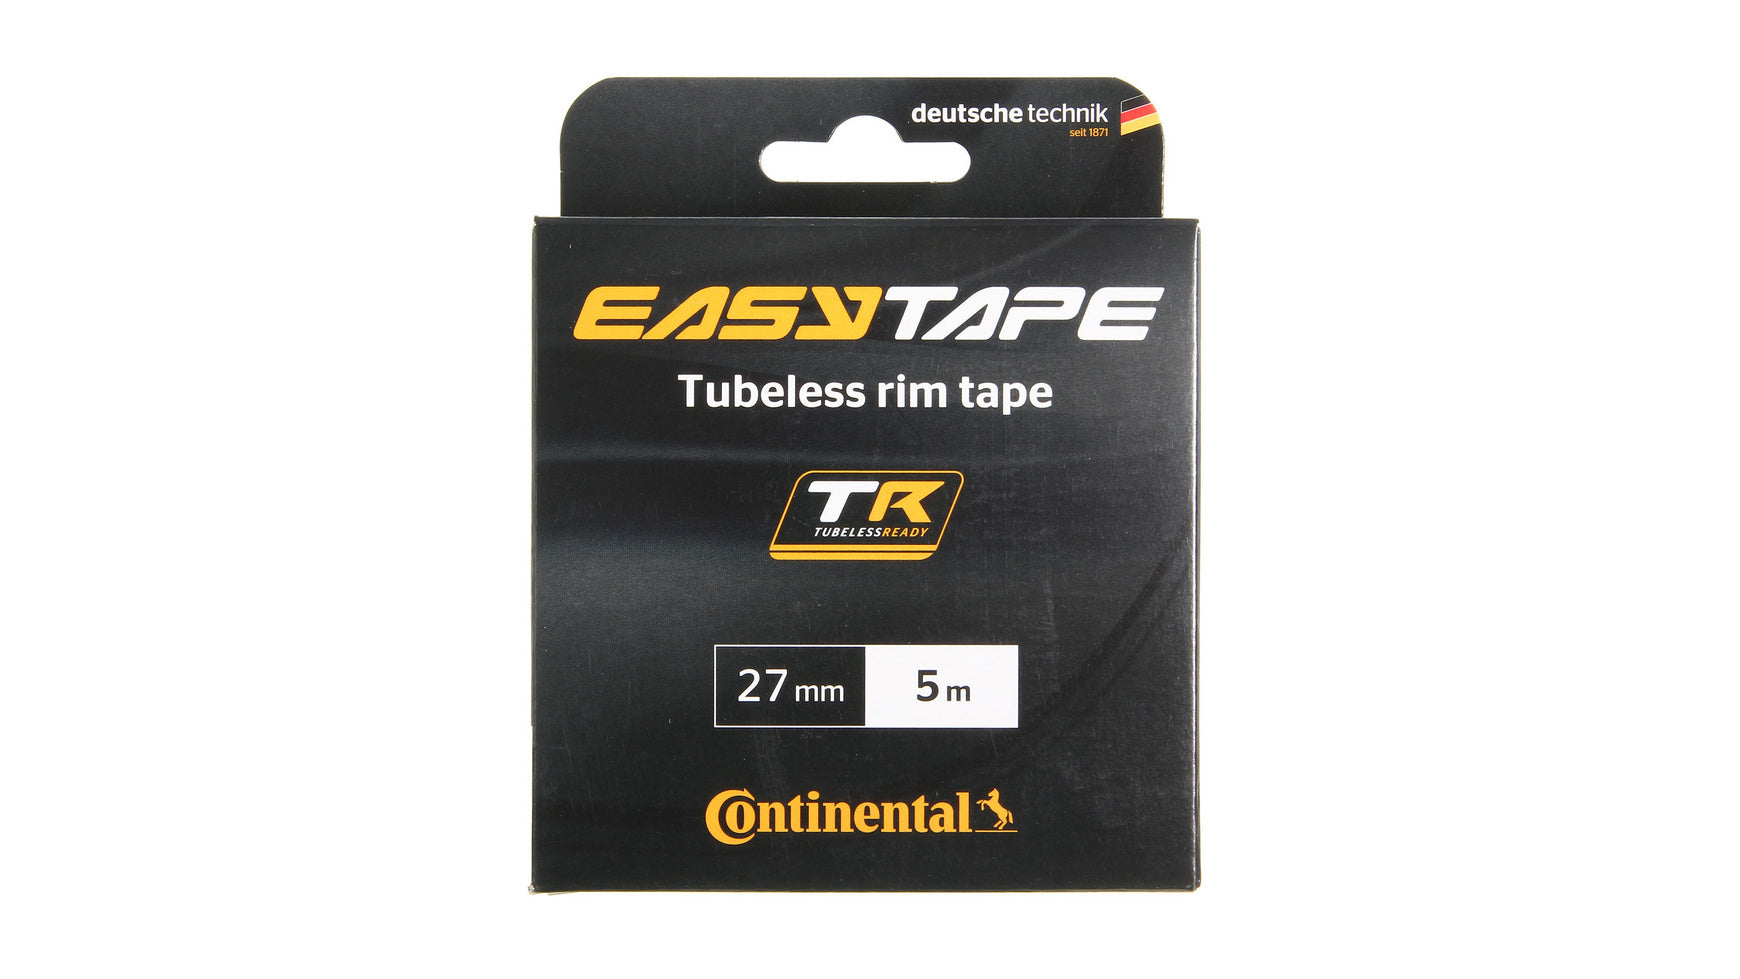 Continental Easy Tape Tubeless 27 mm von Continental